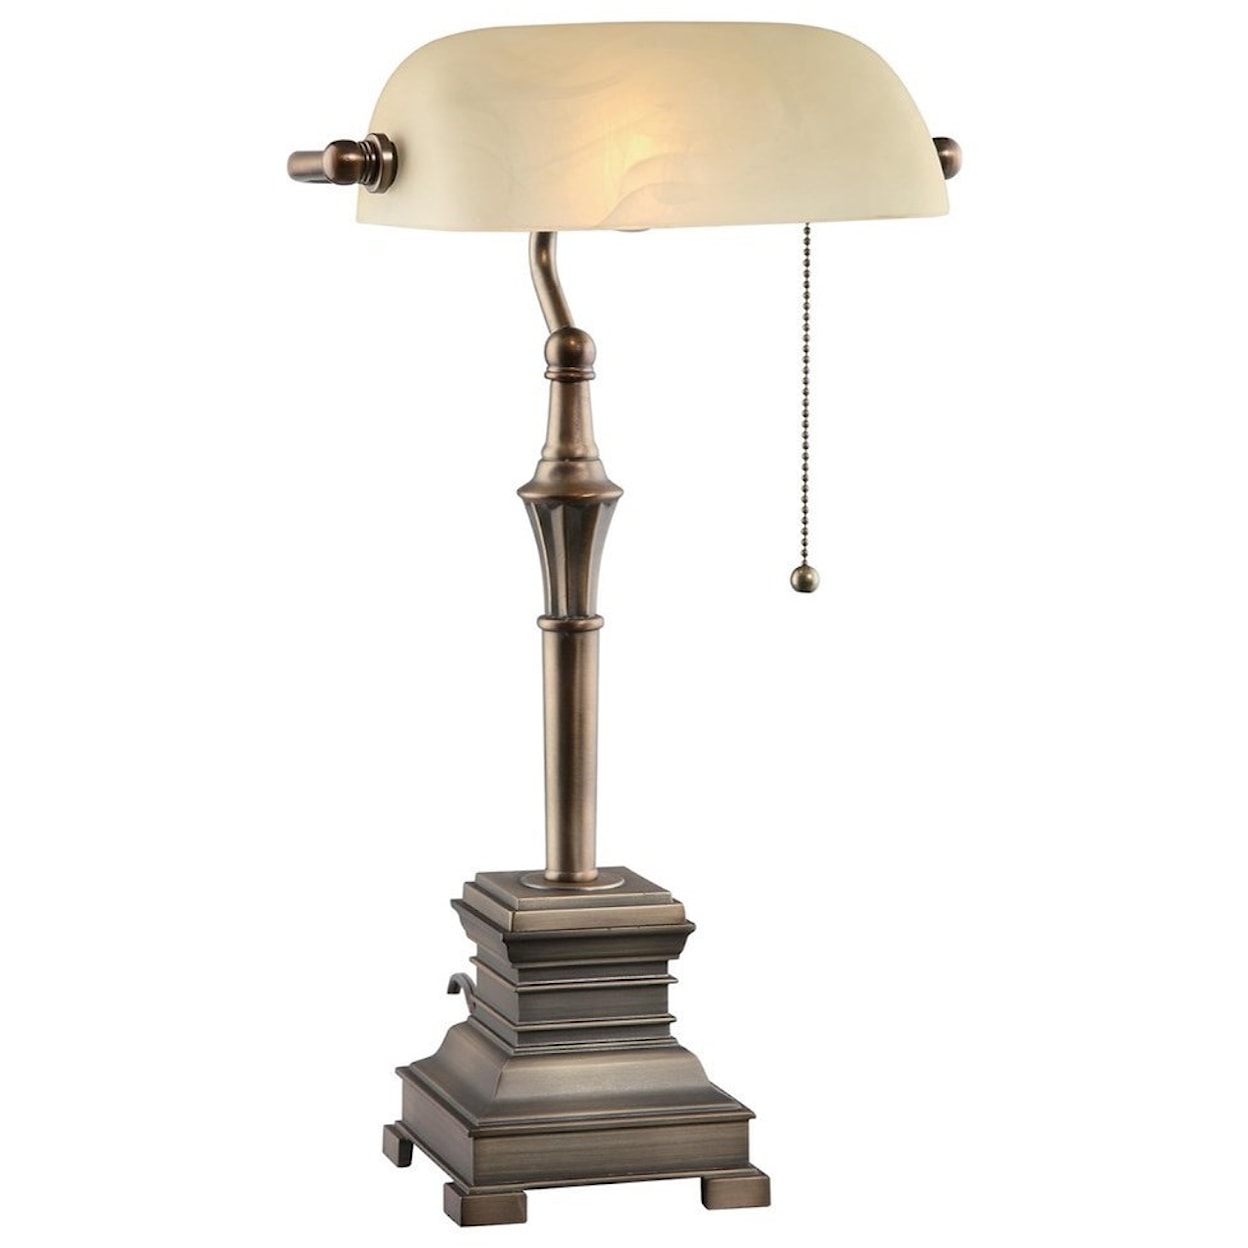 Crestview Collection Lighting Malone Desk Lamp 19"Ht